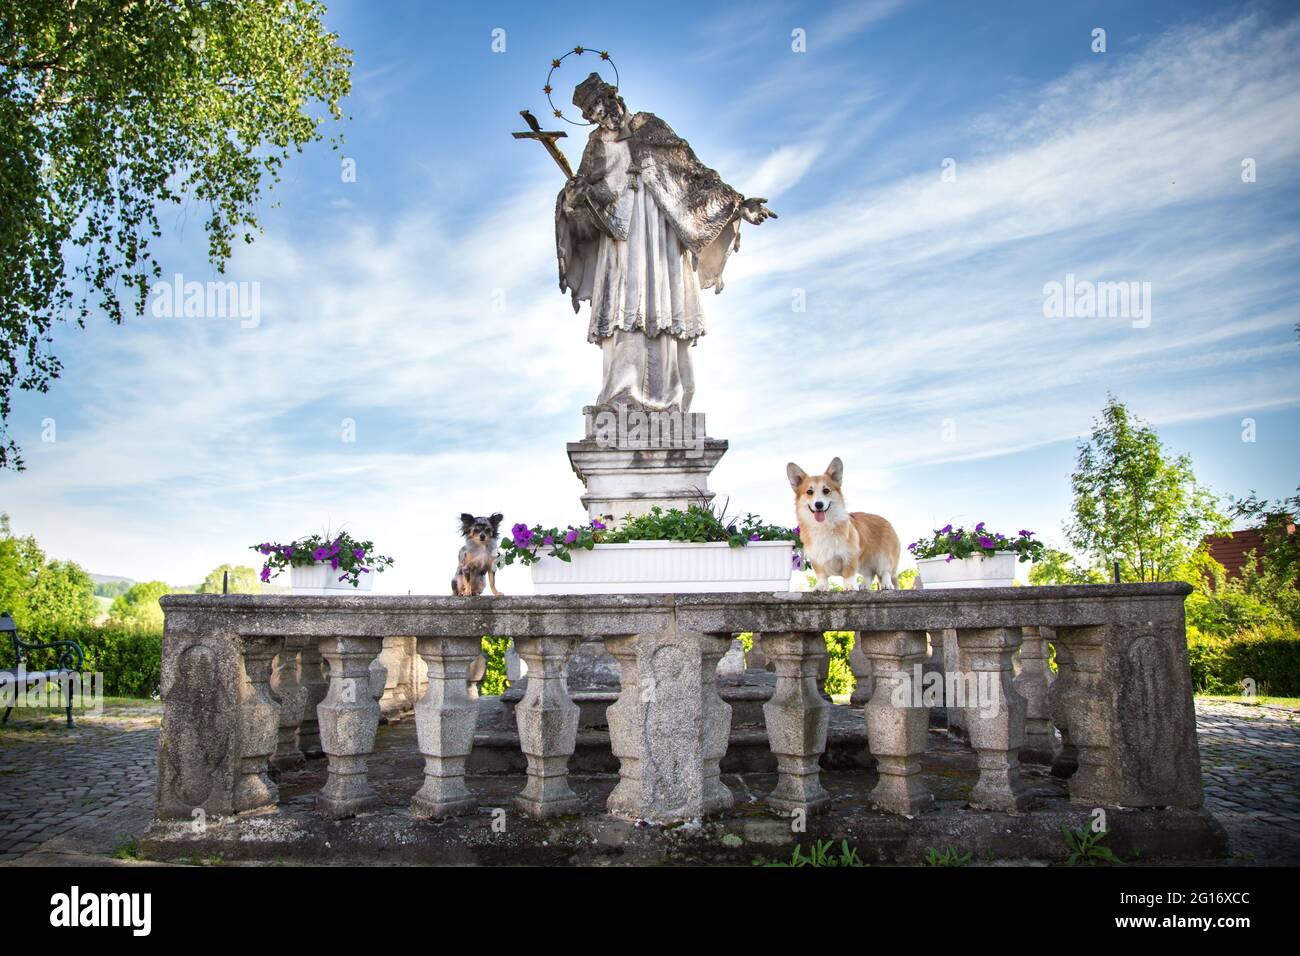 Two dogs (Chihuahua, Welsh Corgi Pembroke) in the city of Weitra, Austria Stock Photo